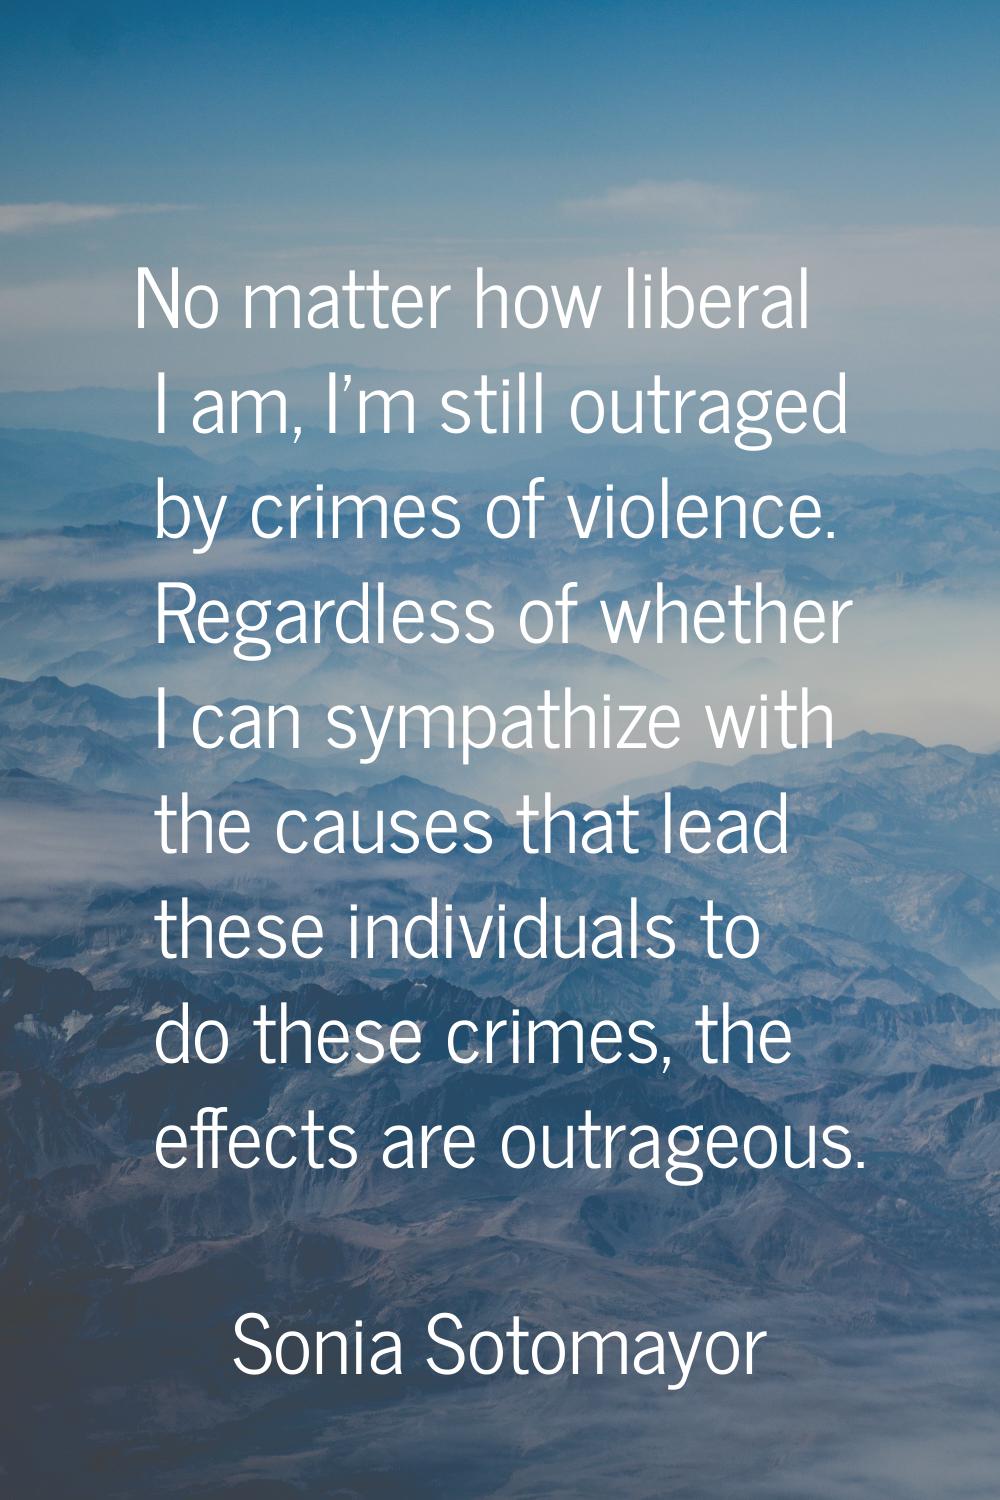 No matter how liberal I am, I'm still outraged by crimes of violence. Regardless of whether I can s